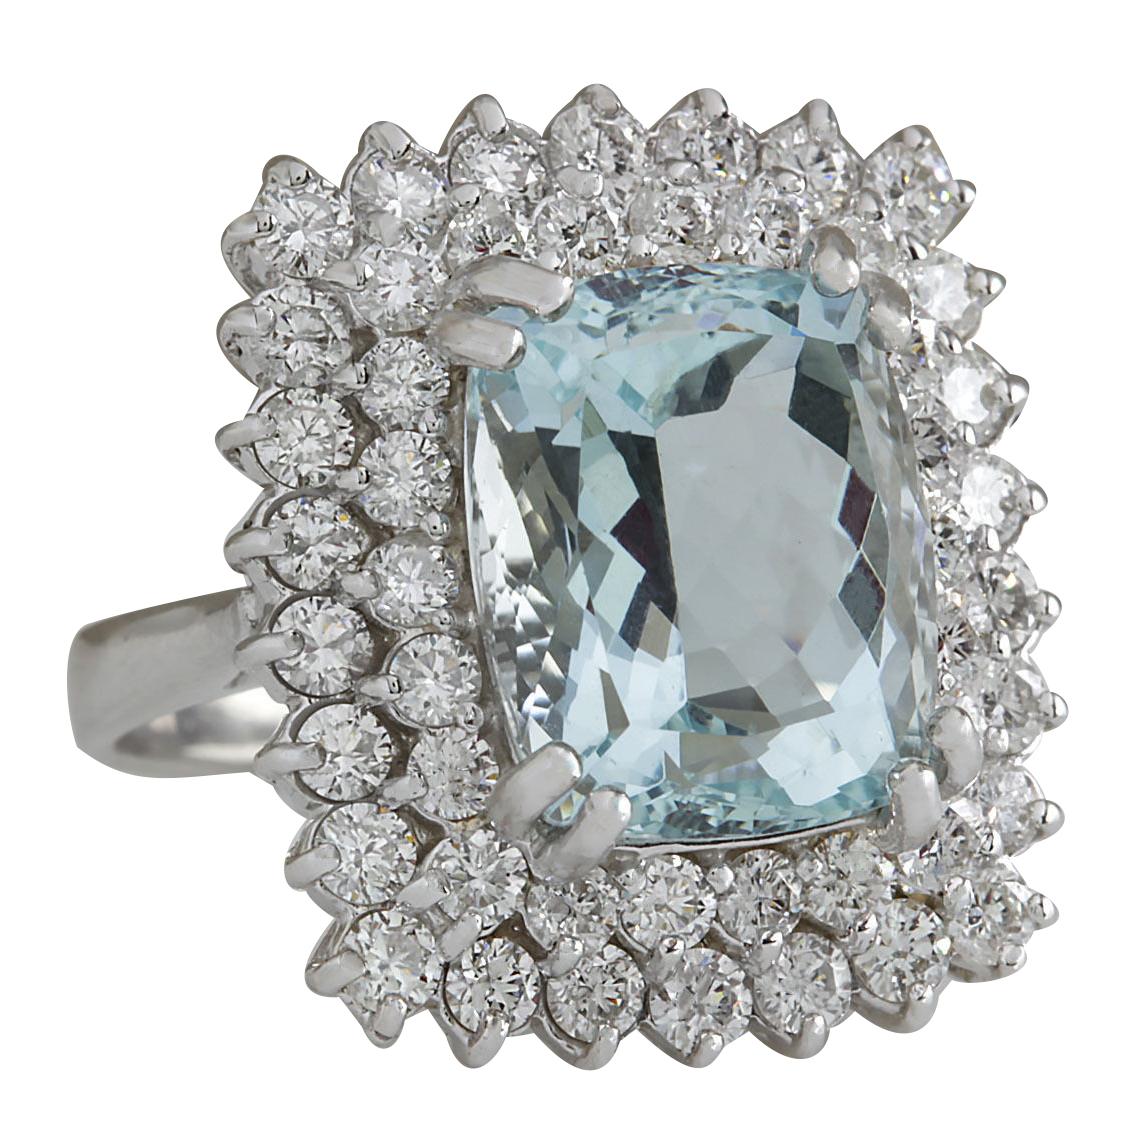 Presenting our breathtaking 10.12 Carat Aquamarine 14 Karat White Gold Diamond Ring, a masterpiece of elegance and sophistication. Crafted from genuine 14K White Gold and stamped for authenticity, this ring weighs 12.0 grams, ensuring both quality